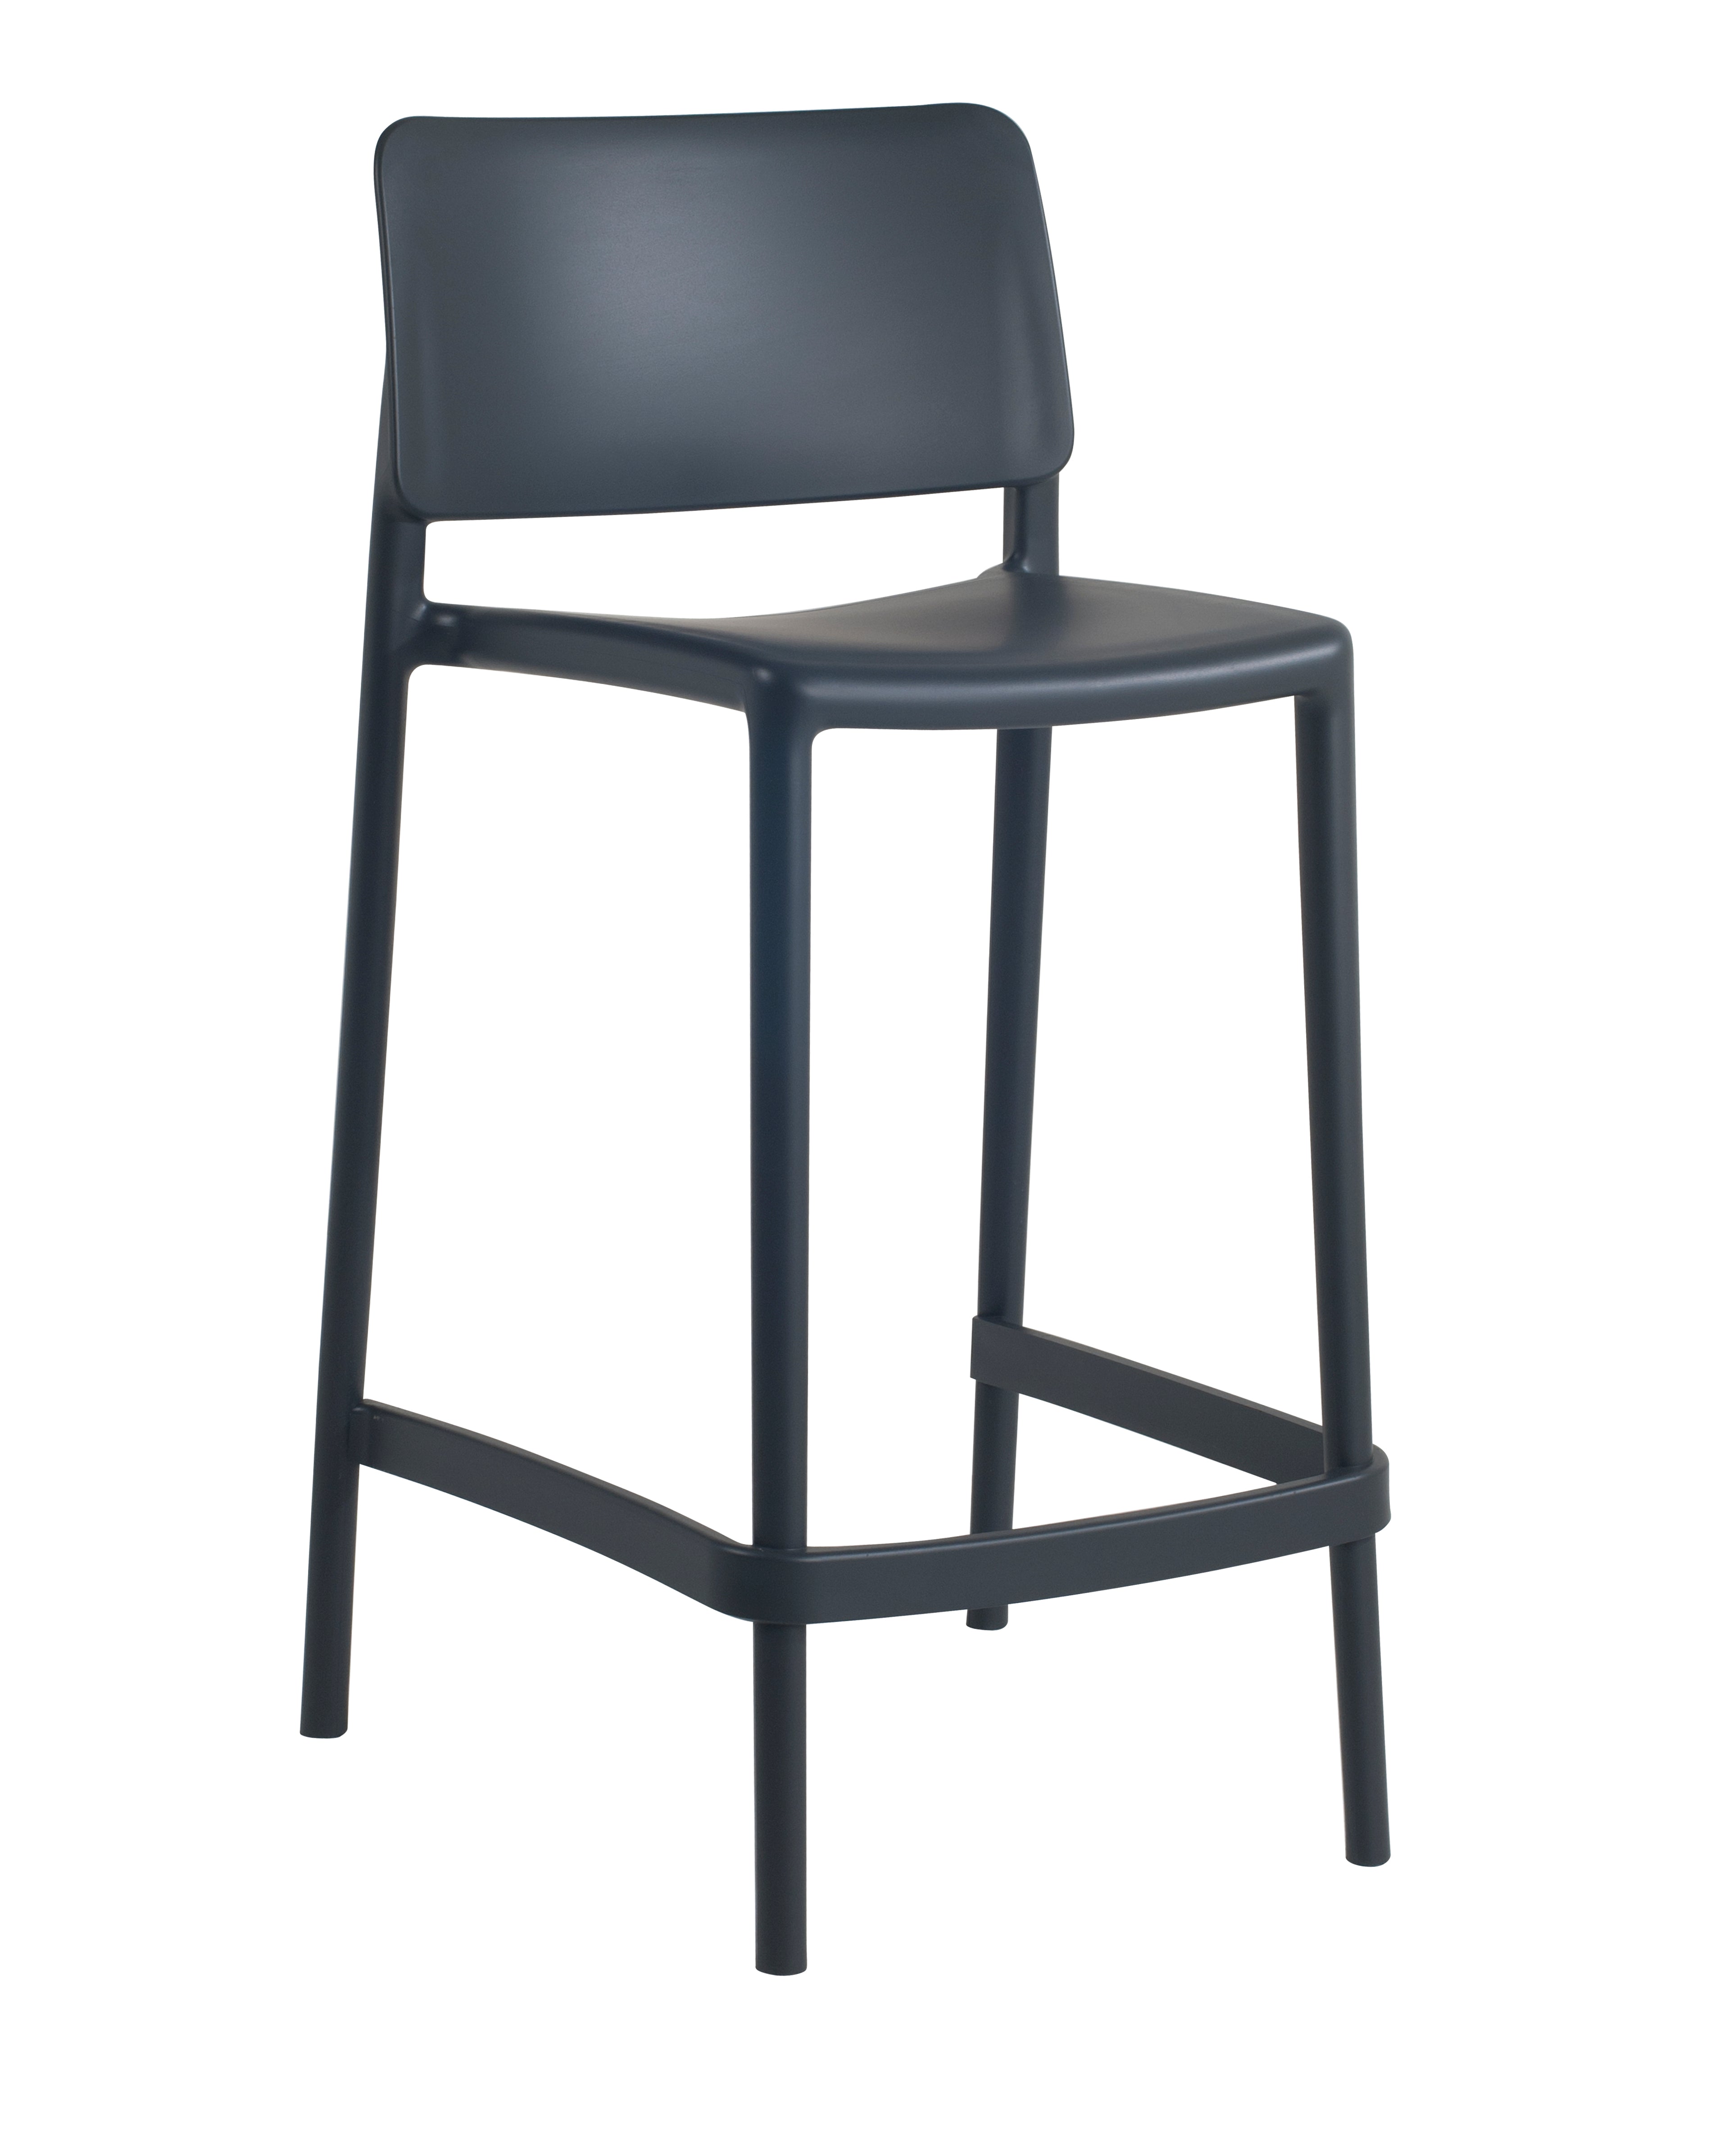 Cleo Plastic Stackable Counter Height Bar Stool in Anthracite Black - (Set of 2)